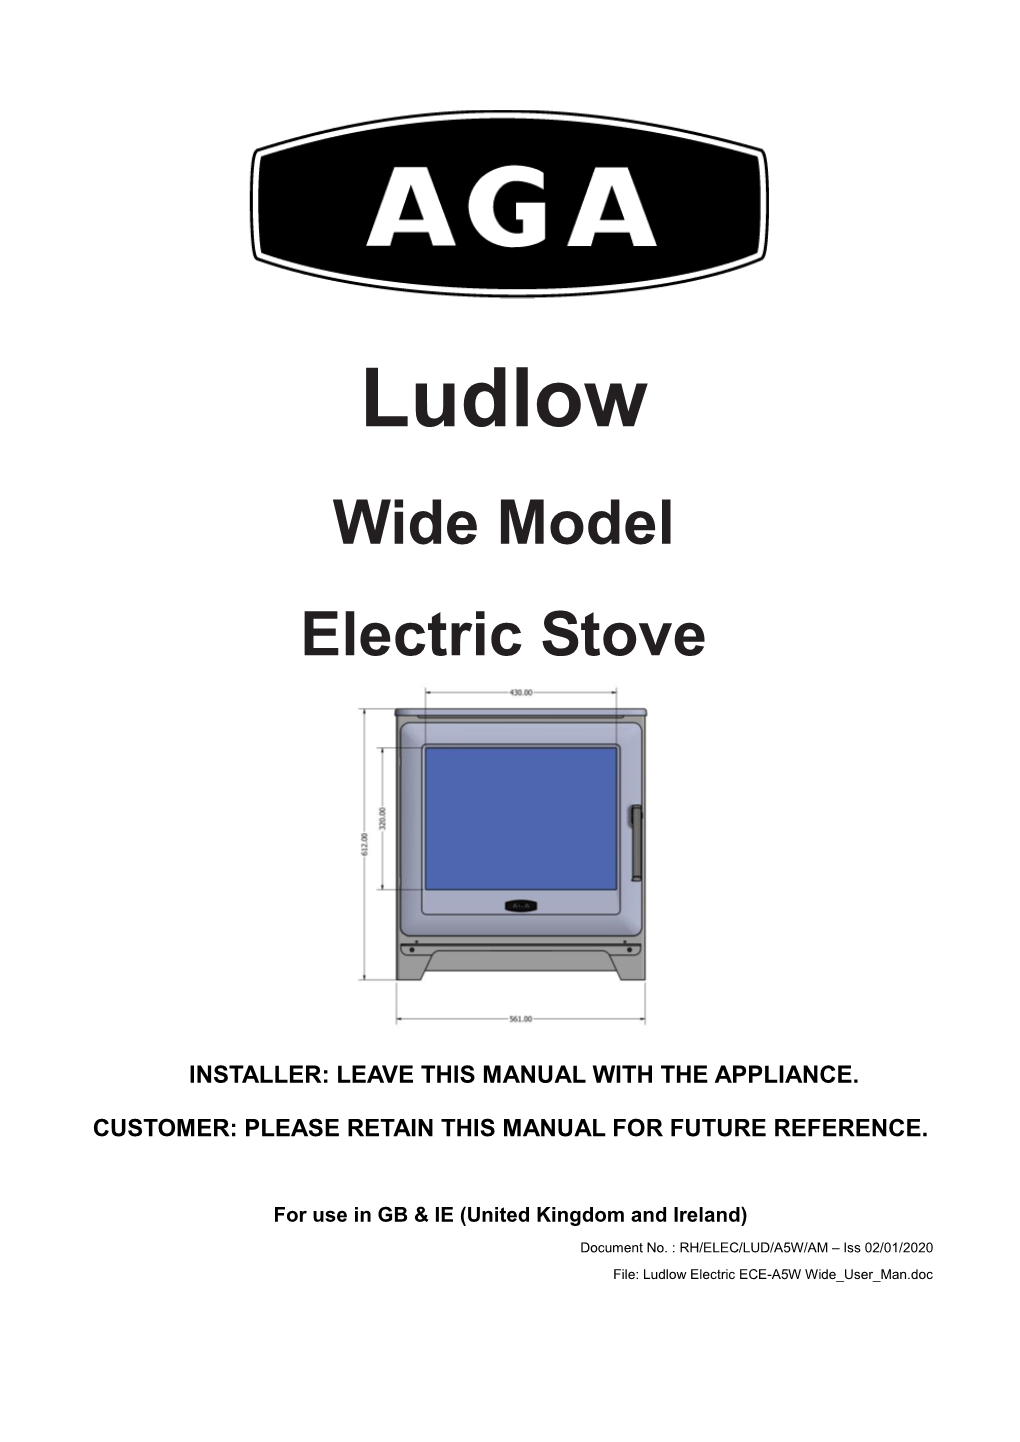 Ludlow Wide Model Electric Stove